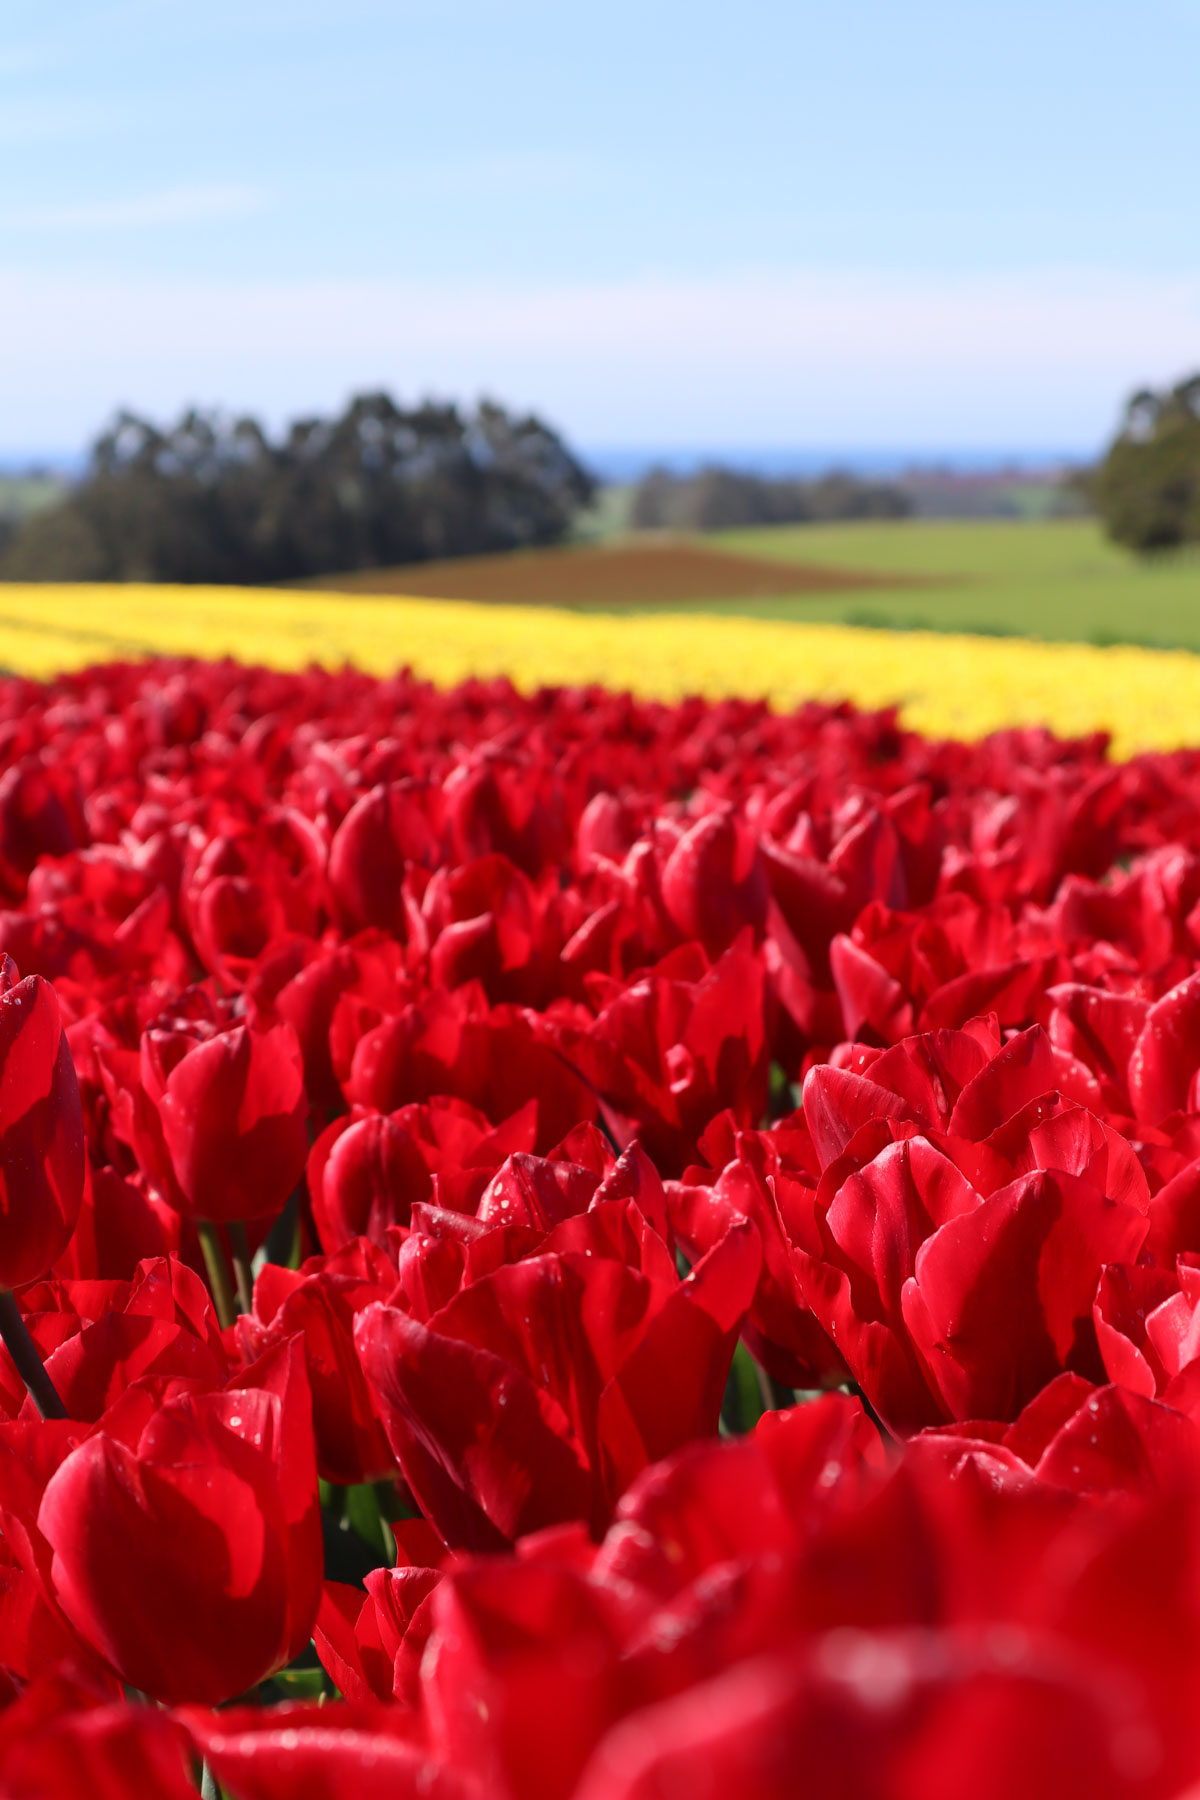 Explore North-West Tasmania with Coastline Tours. Join our exclusive tulip farm adventure and capture vibrant memories amidst blooming tulips. 1